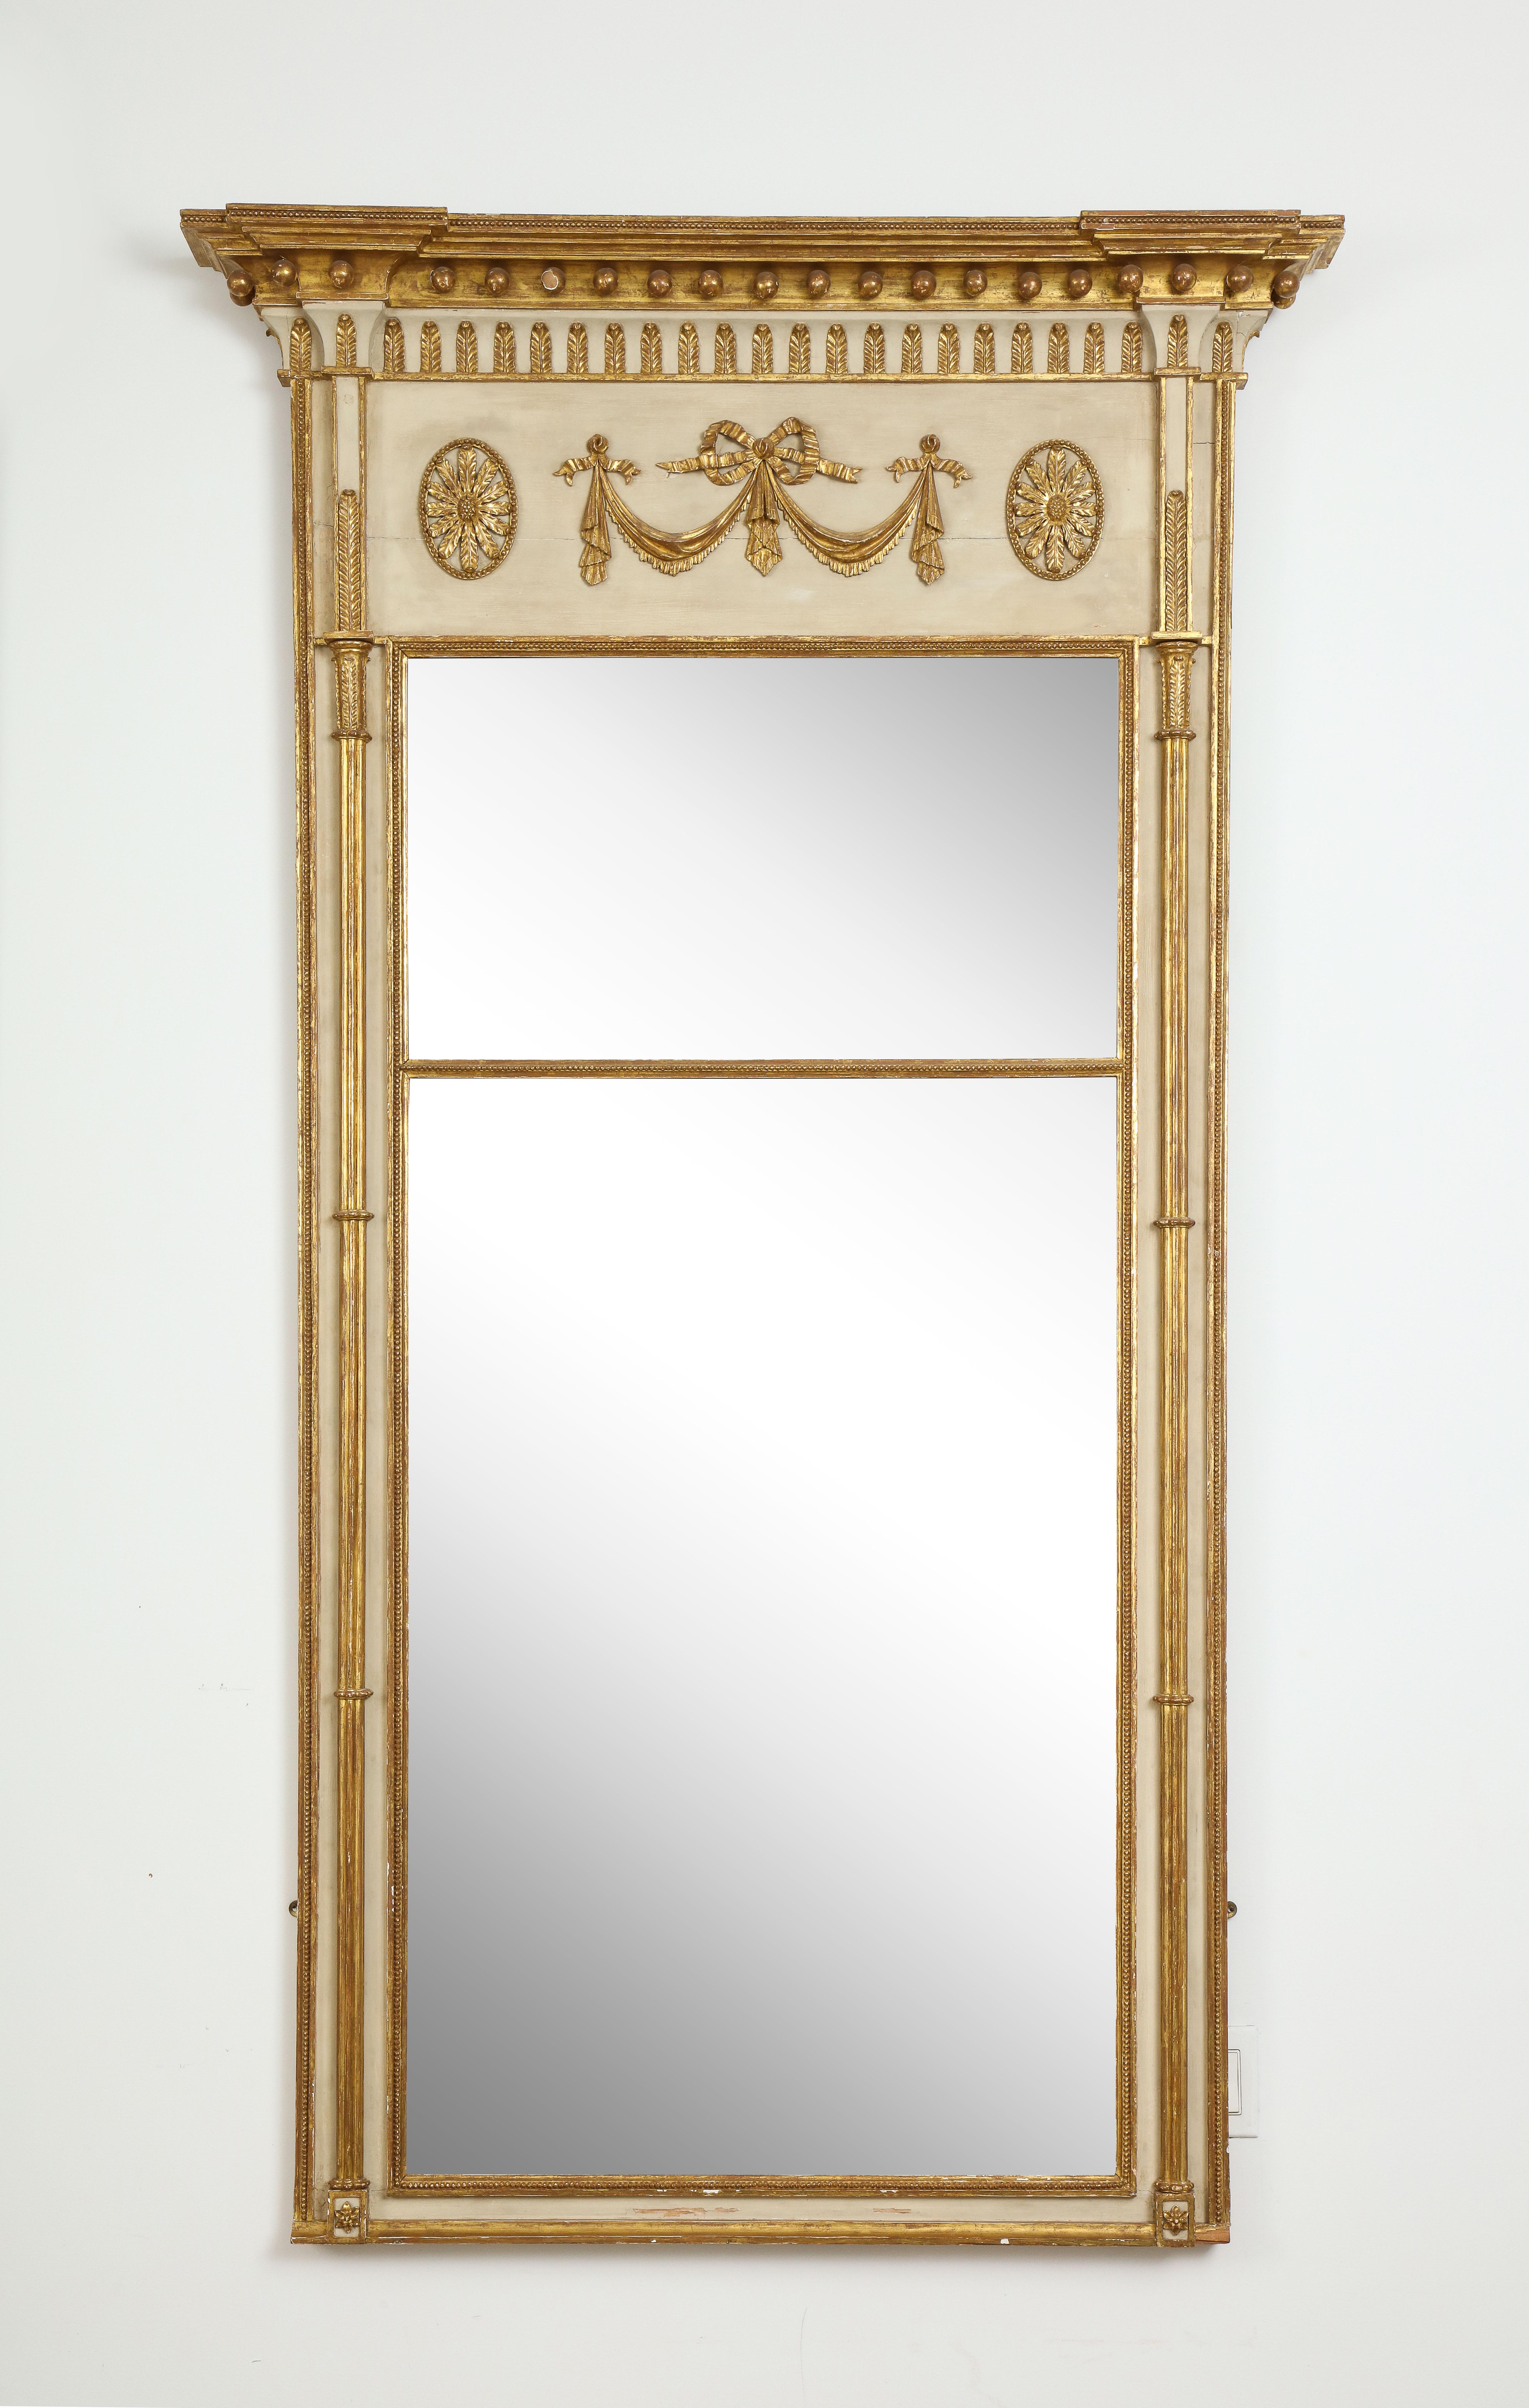 Of elegant architectural design and finely articulated ornament. The divided rectangular mirror plates set between gilt cluster columns, and surmounted by an ivory-painted frieze with gilt ribbon-tied swags between two oval flowerheads below a